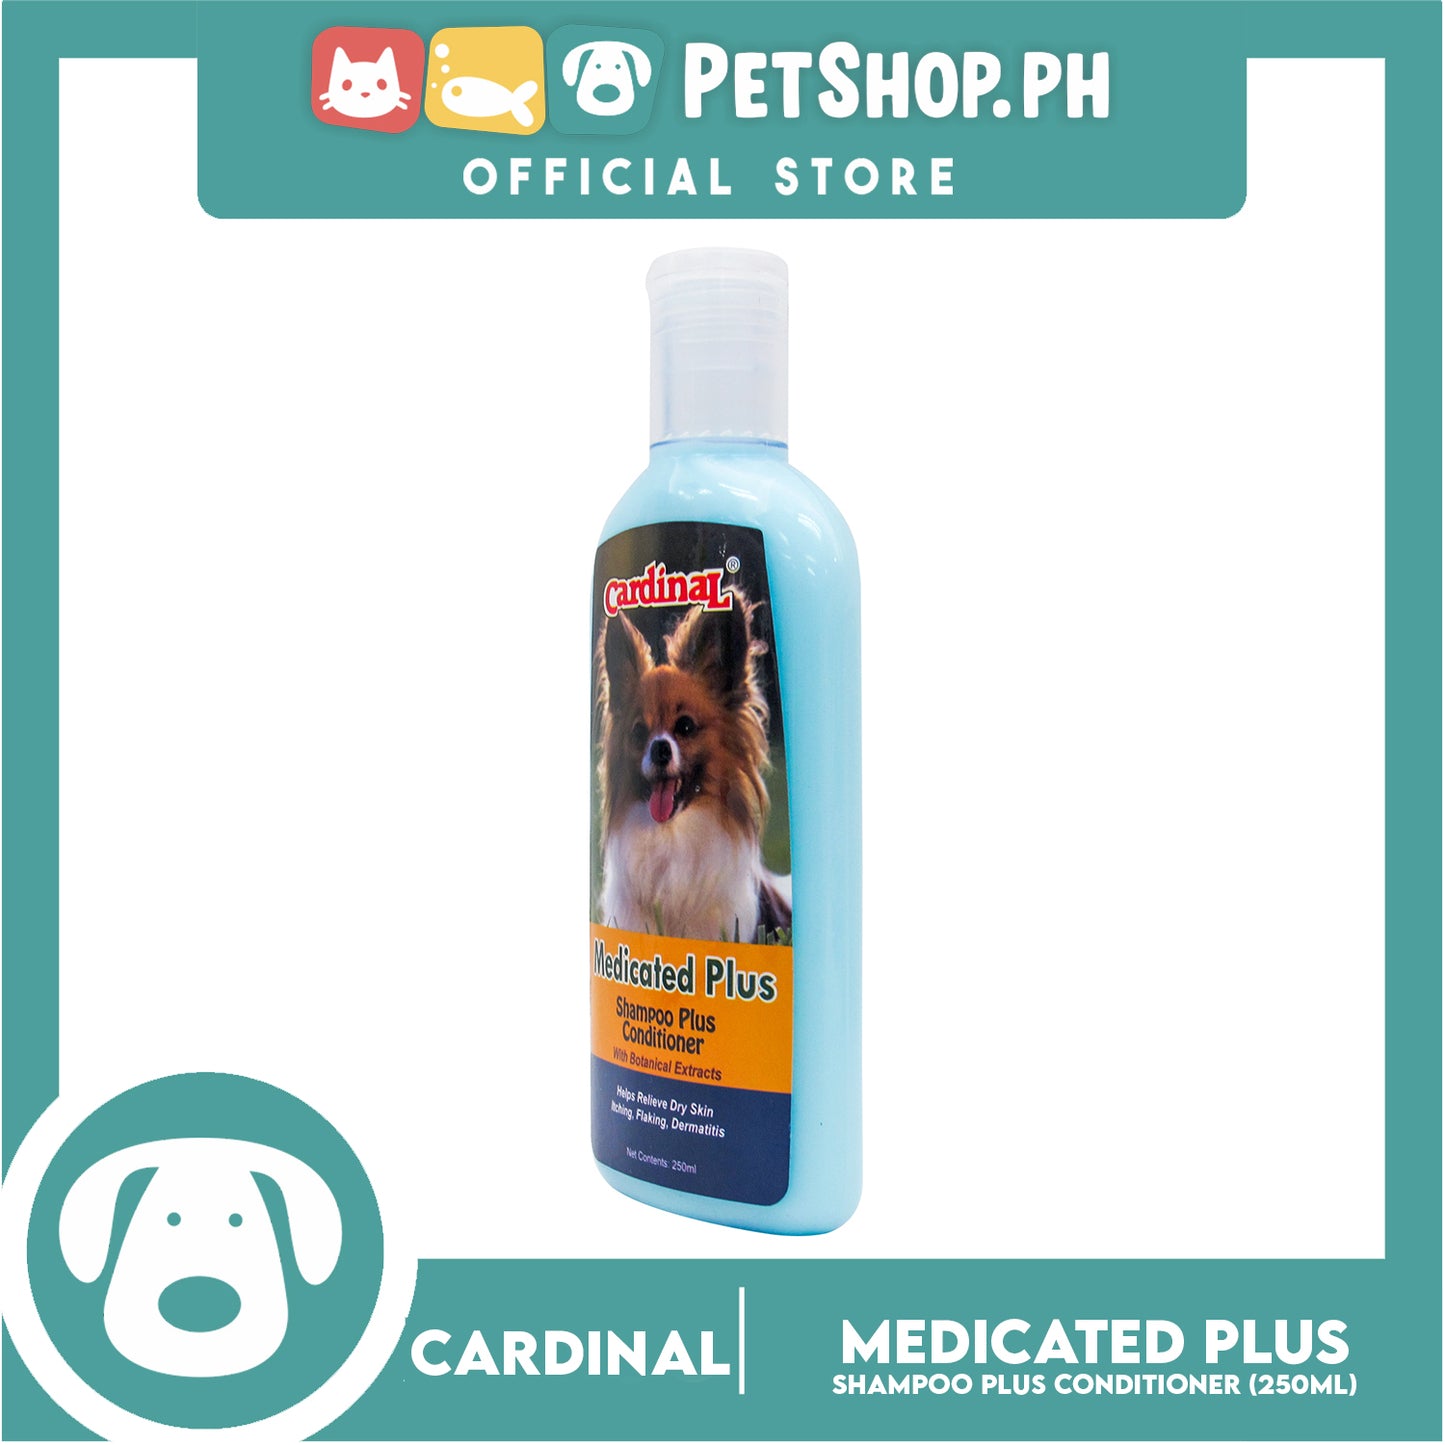 Cardinal Medicated Plus Shampoo Plus Conditioner In One 250ml For Dogs and Cats